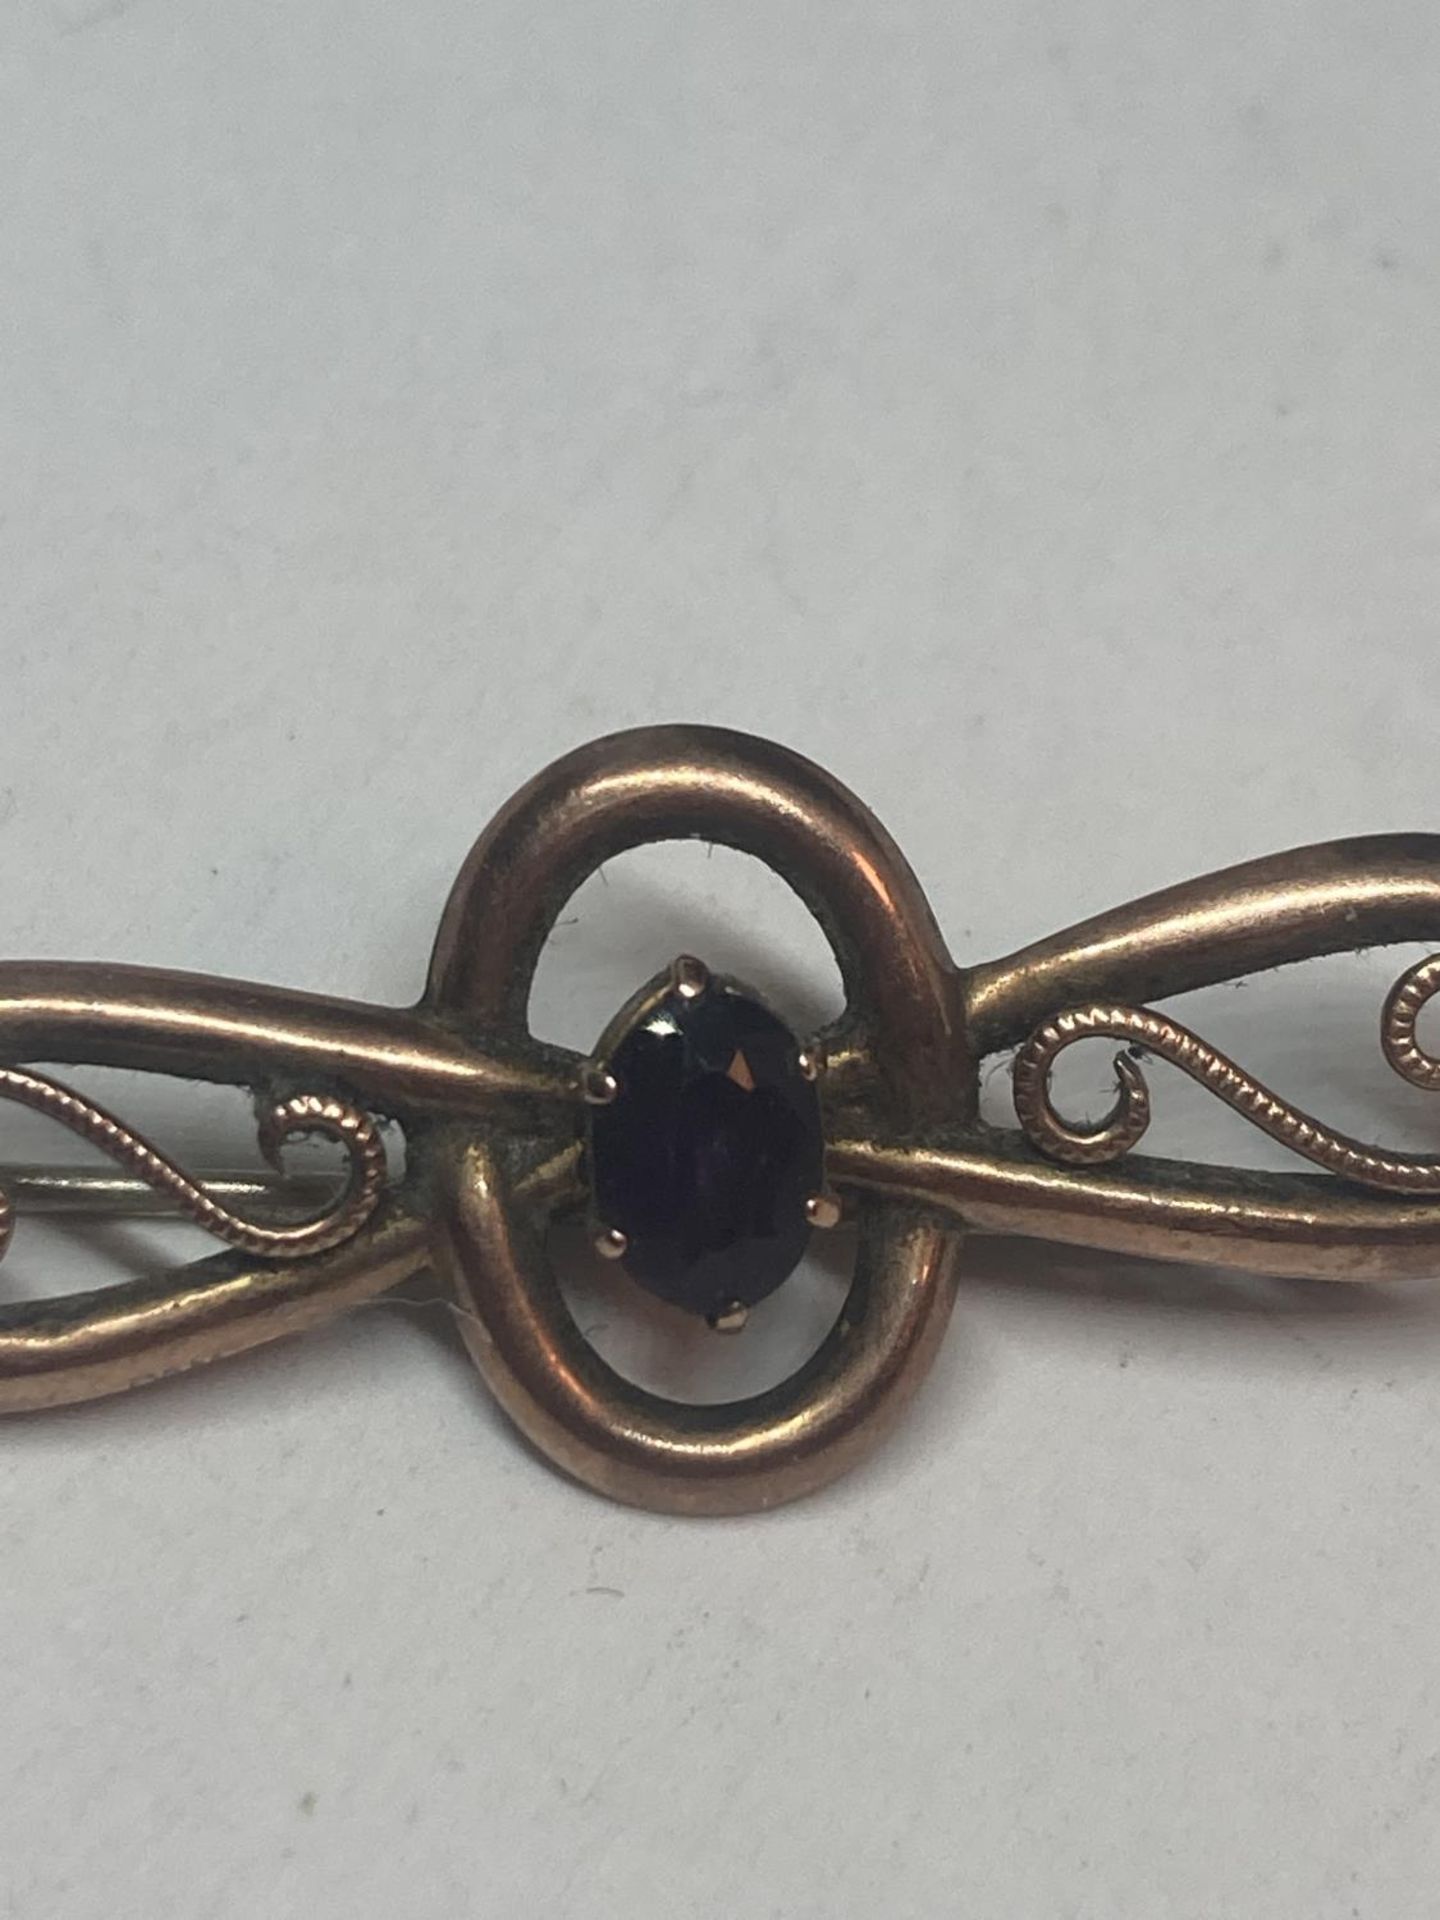 A 9 CARAT GOLD VINTAGE BROOCH WITH A SINGLE PURPLE STONE GROSS WEIGHT 2.05 GRAMS - Image 3 of 10